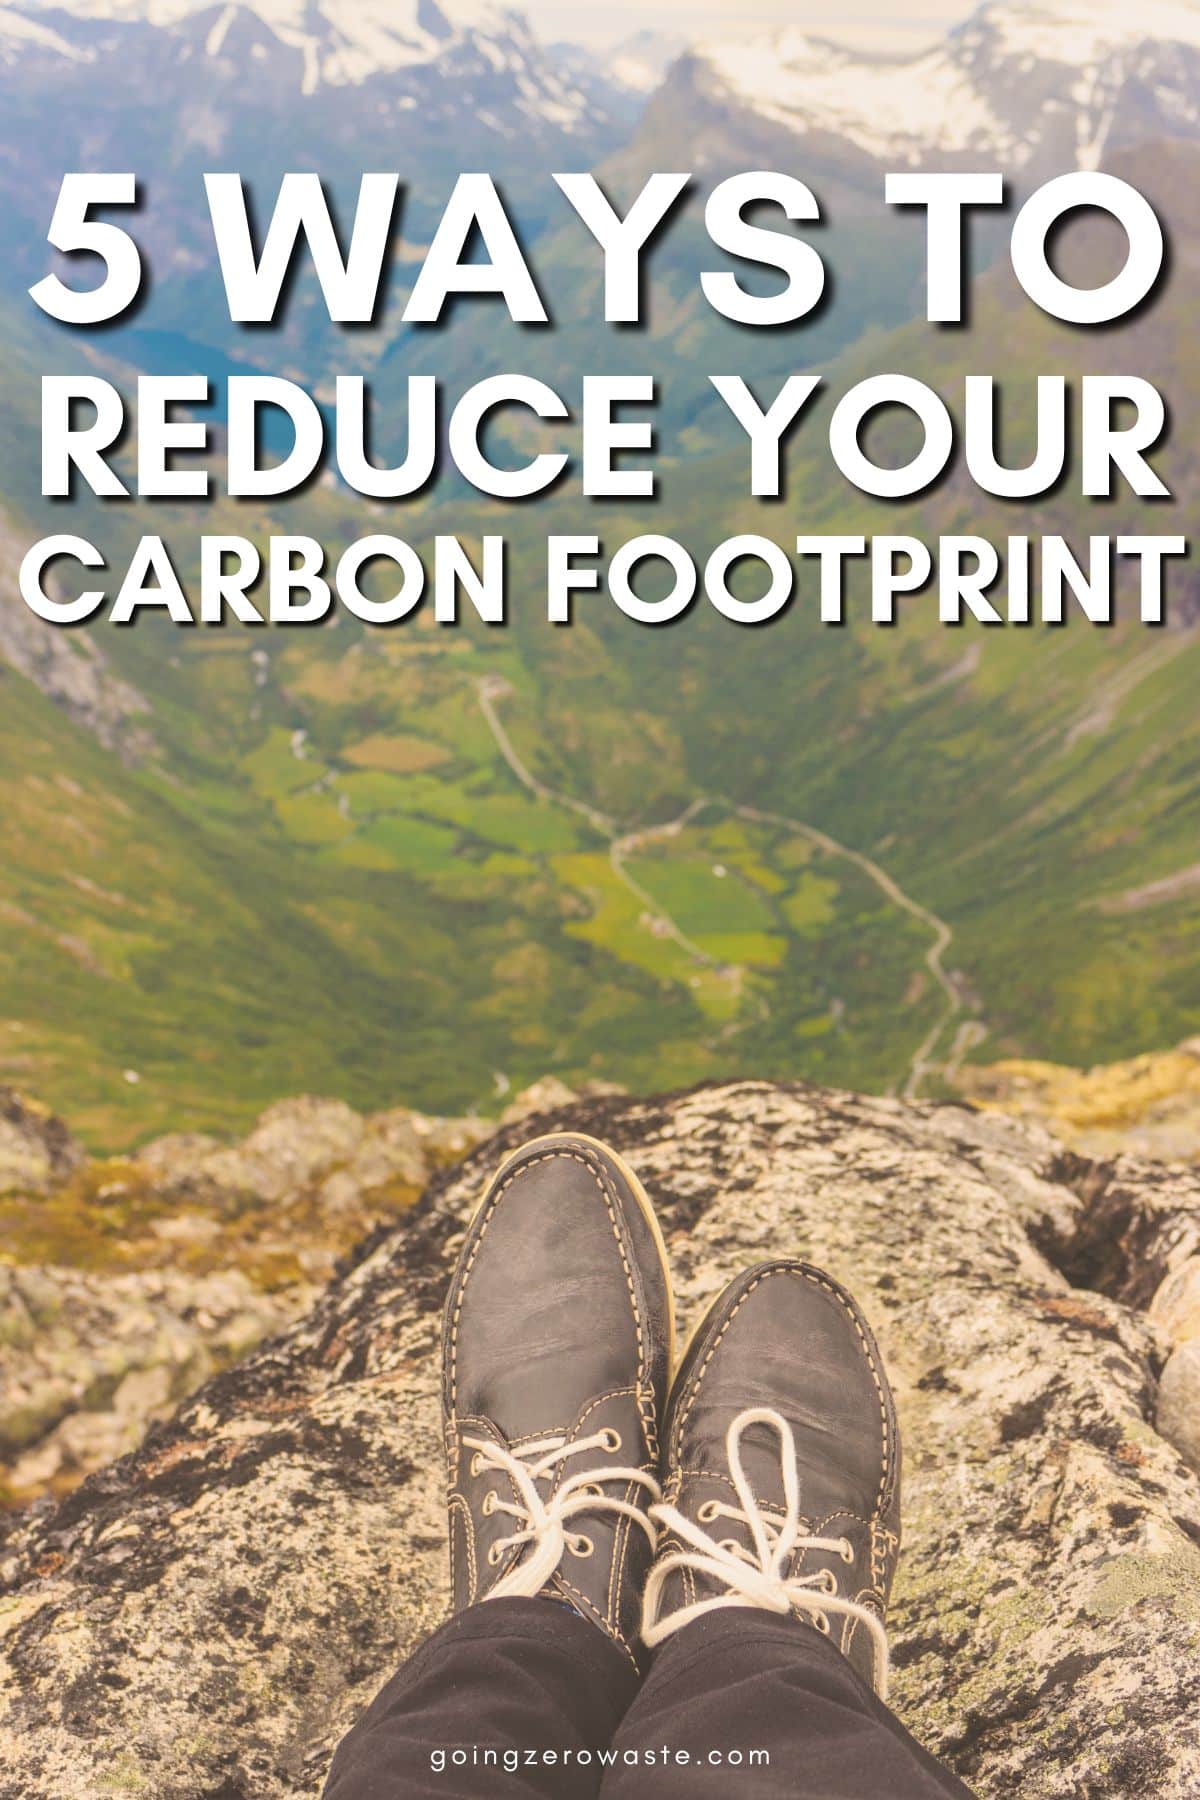 5 Ways to Reduce your Carbon Footprint this Summer – MassEnergize